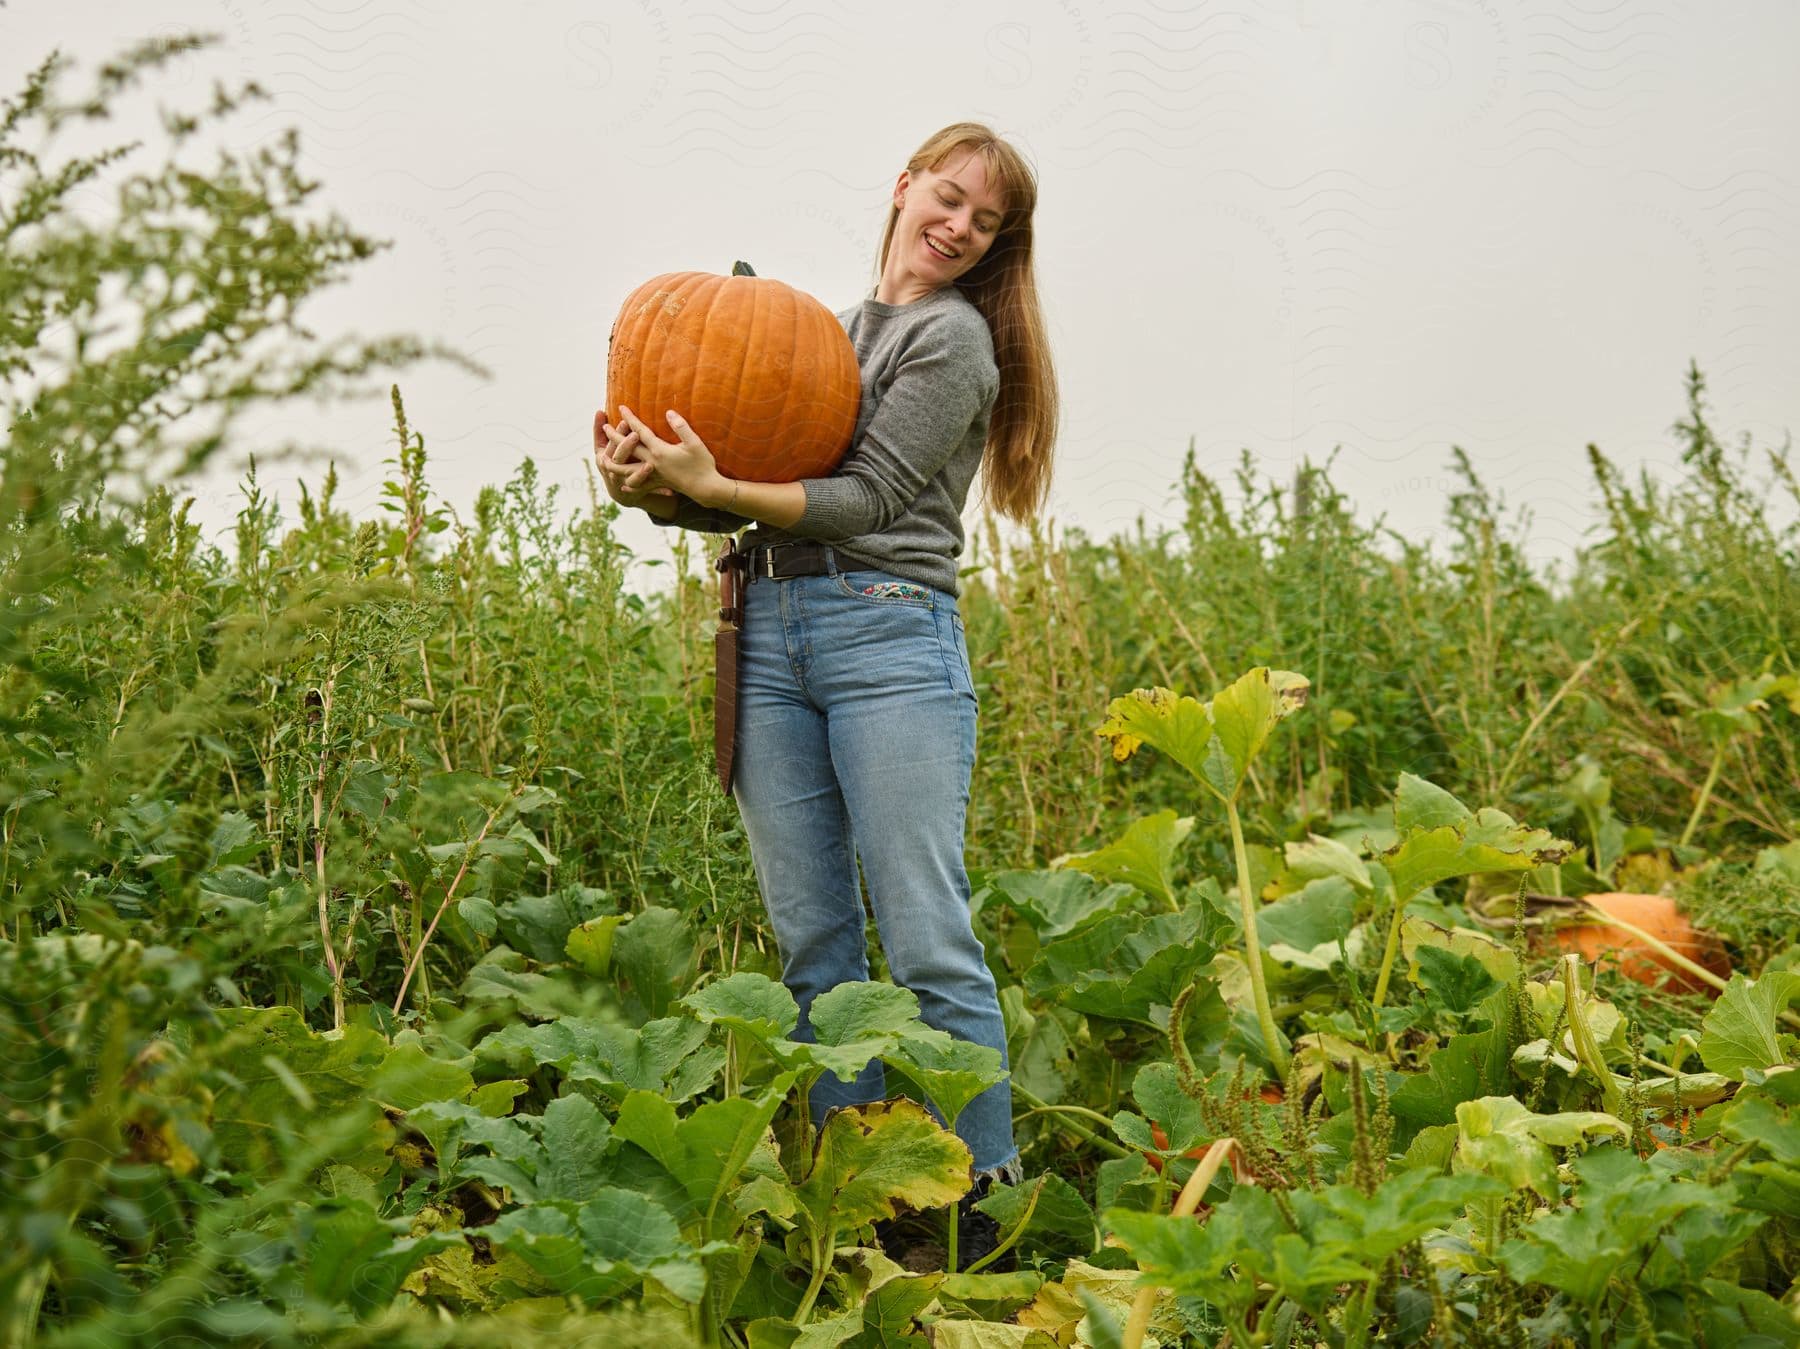 A woman is standing in a pumpkin patch holding a pumpkin in her arms